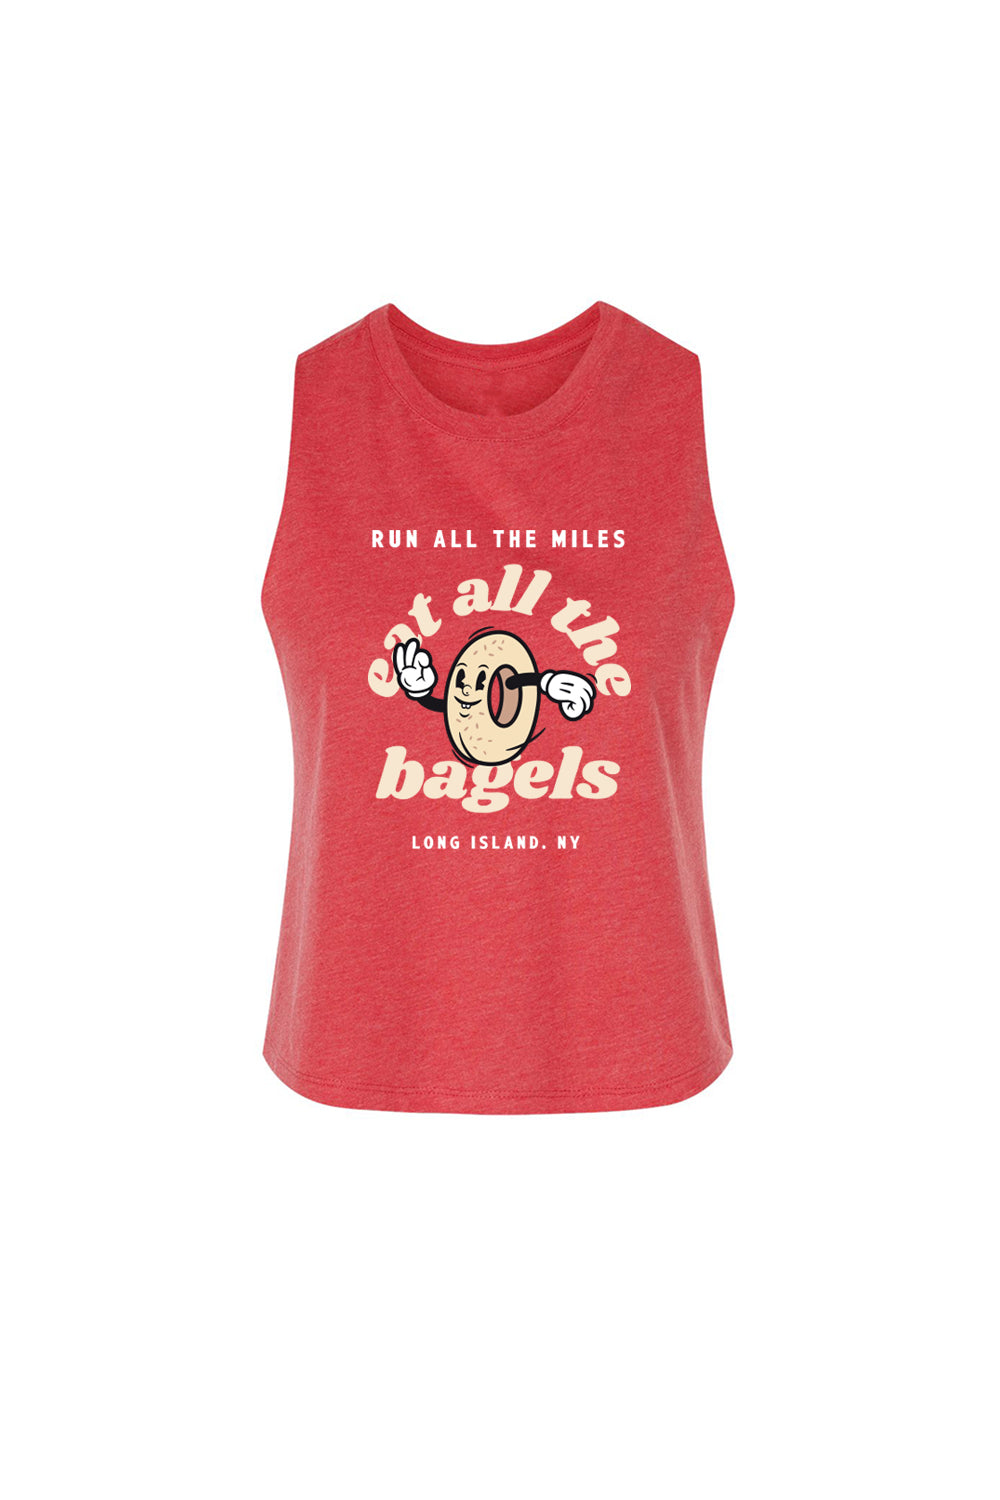 Run All The Miles, Eat All The Bagels Racerback Crop Top